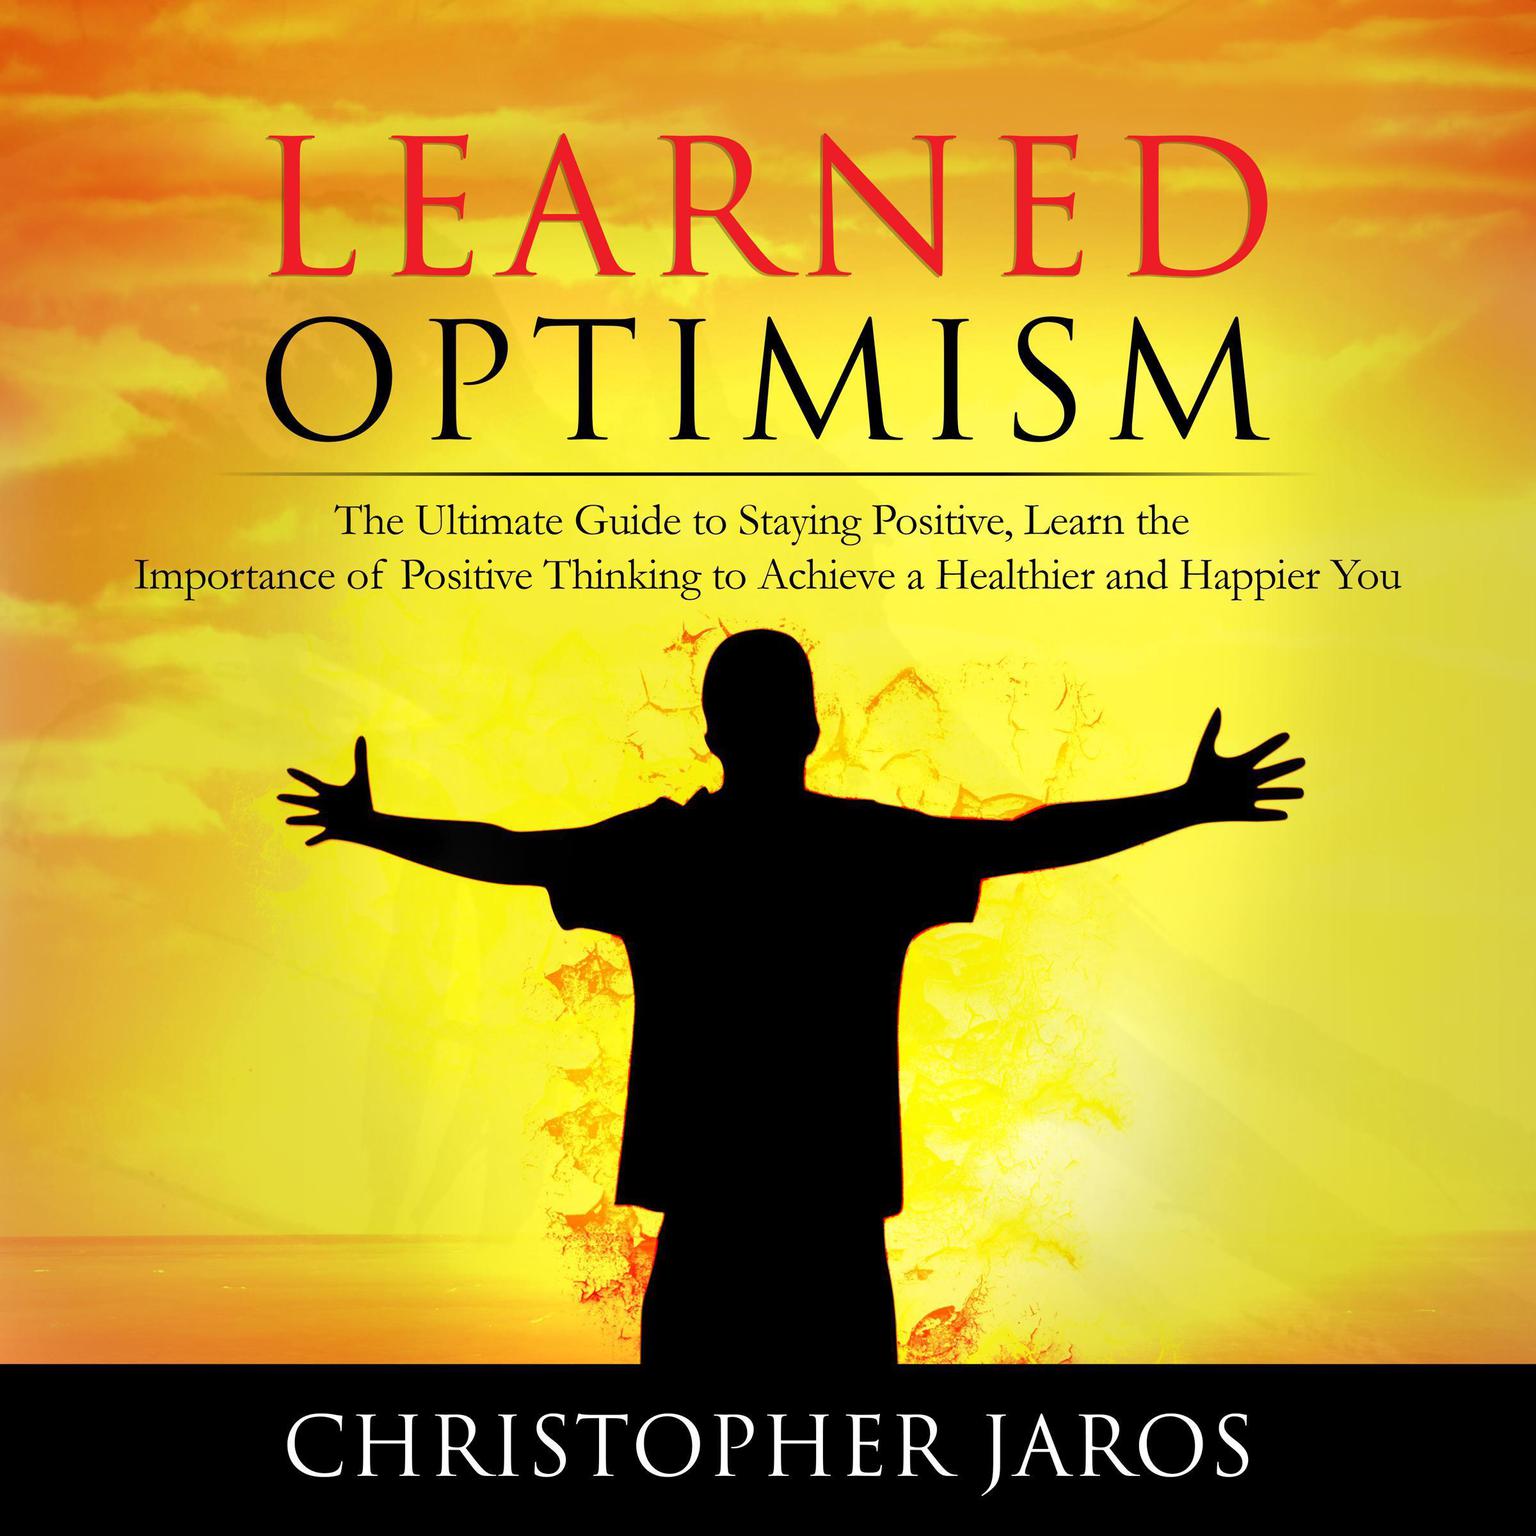 Learned Optimism: The Ultimate Guide to Staying Positive, Learn the Importance of Positive Thinking to Achieve a Healthier and Happier You Audiobook, by Christopher Jaros